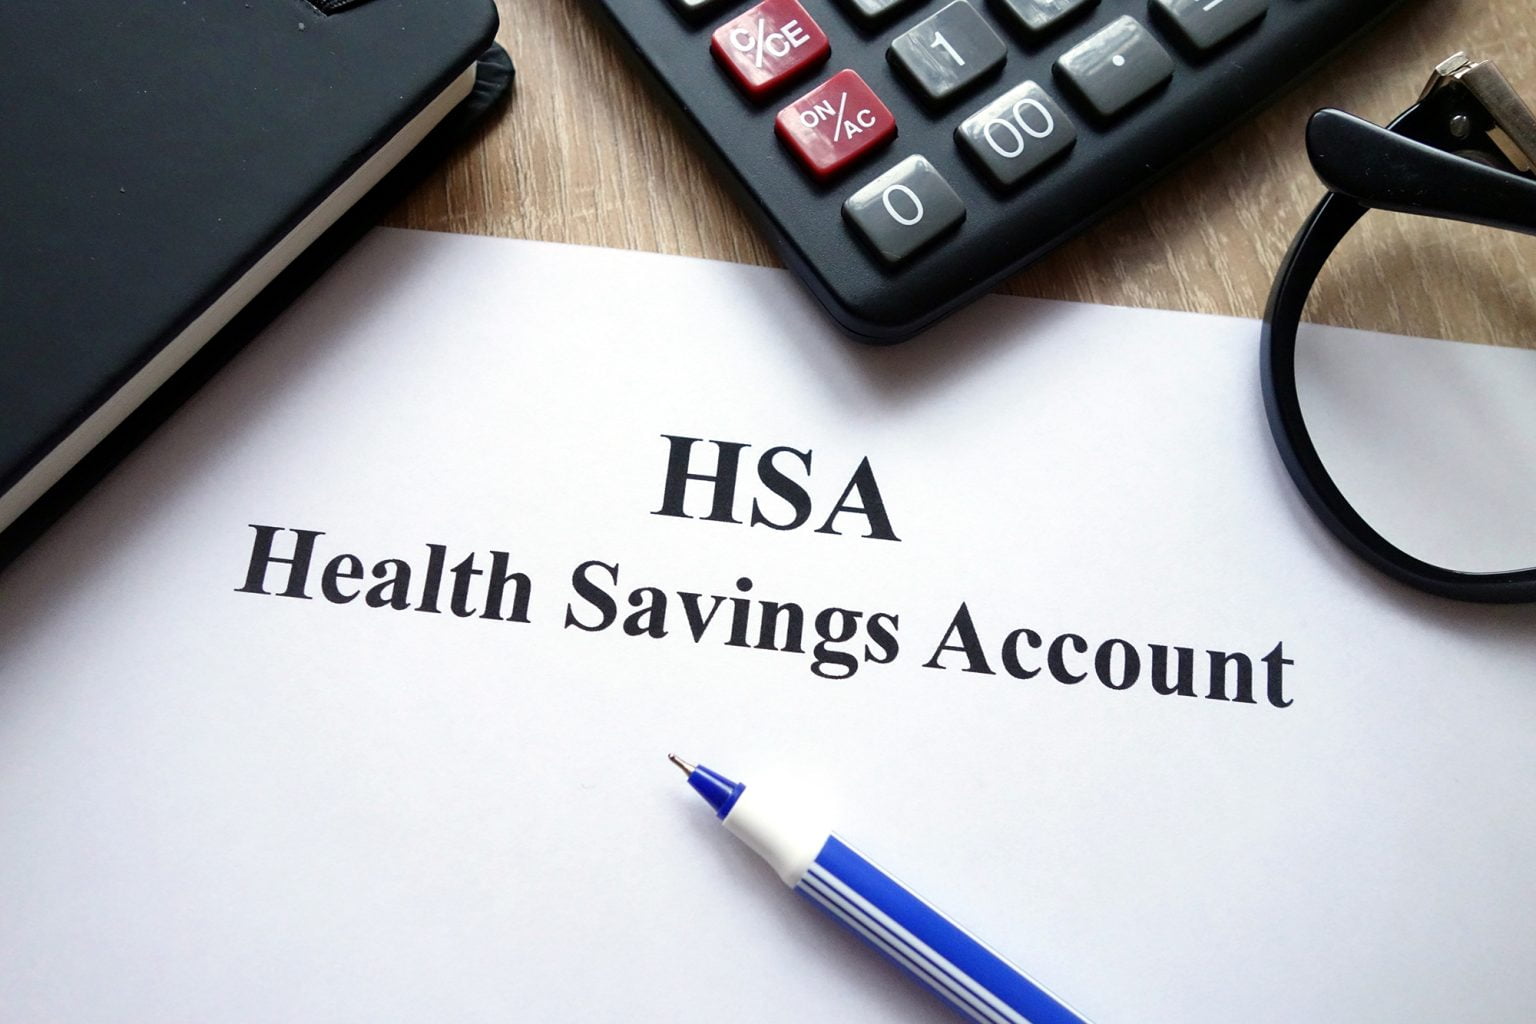 HSA health savings account document, calculator, pen and glasses on desk